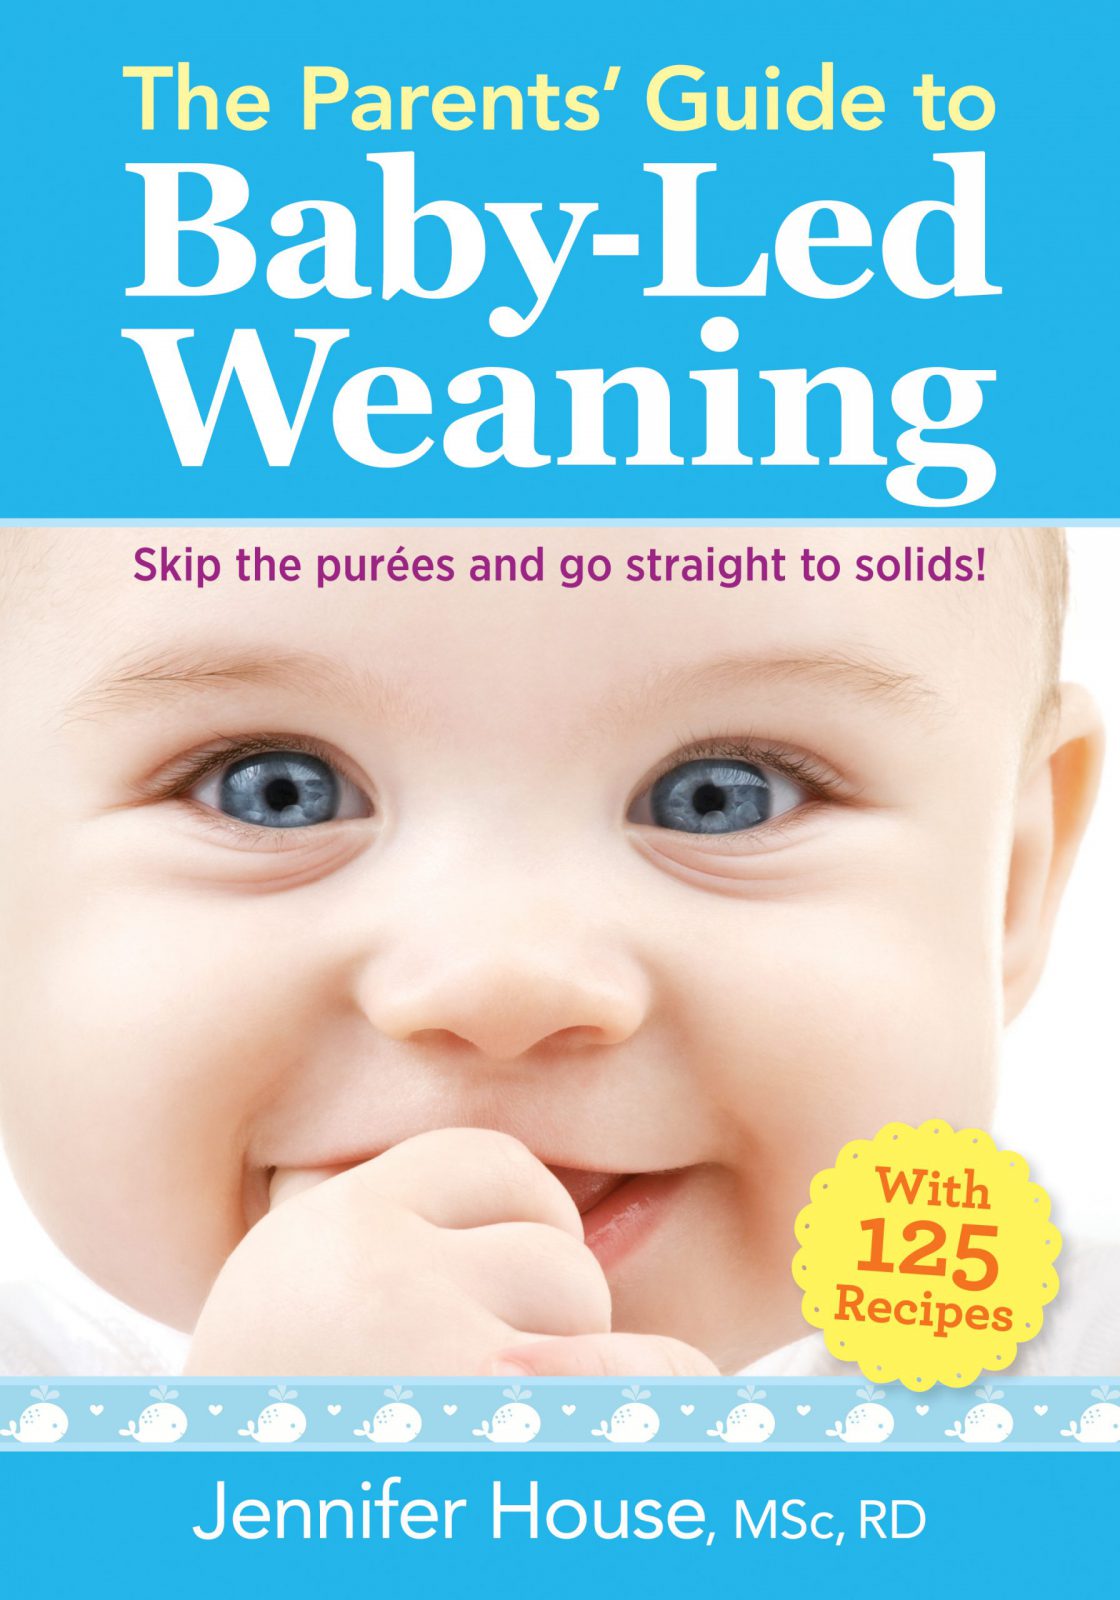 The Parents’ Guide to Baby-Led Weaning